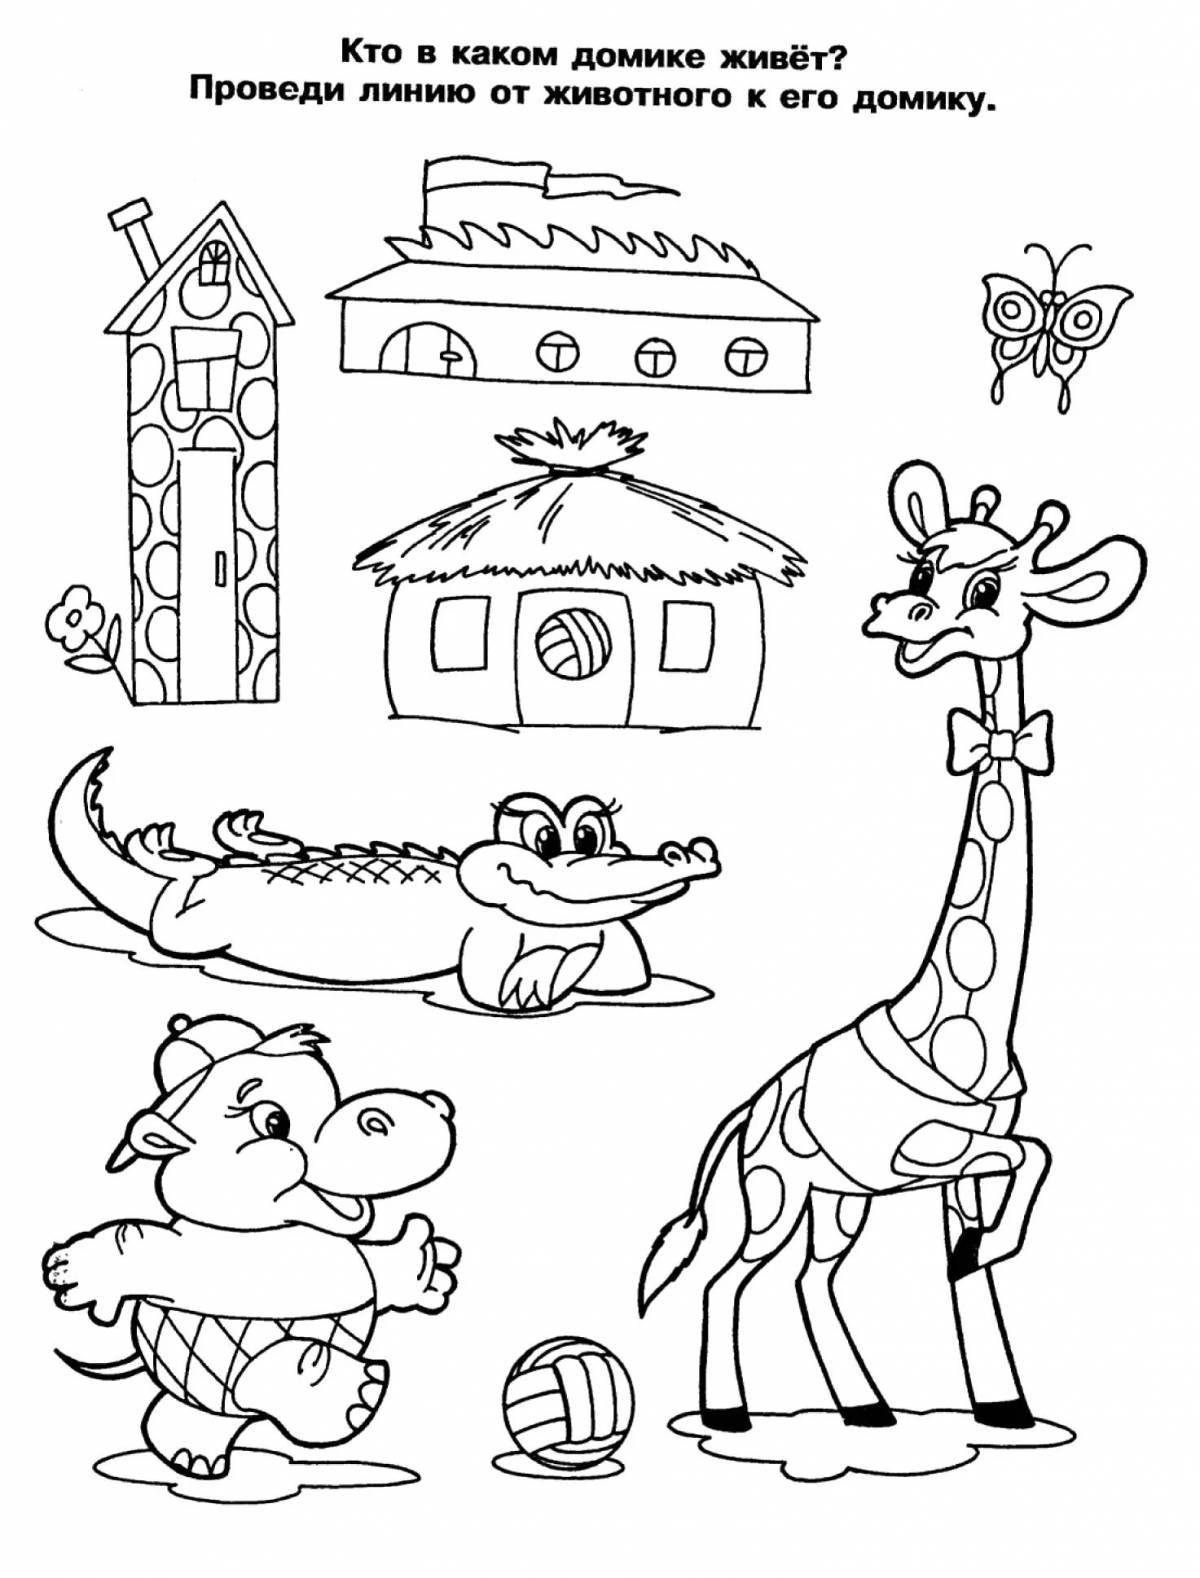 Amusing coloring book for kids